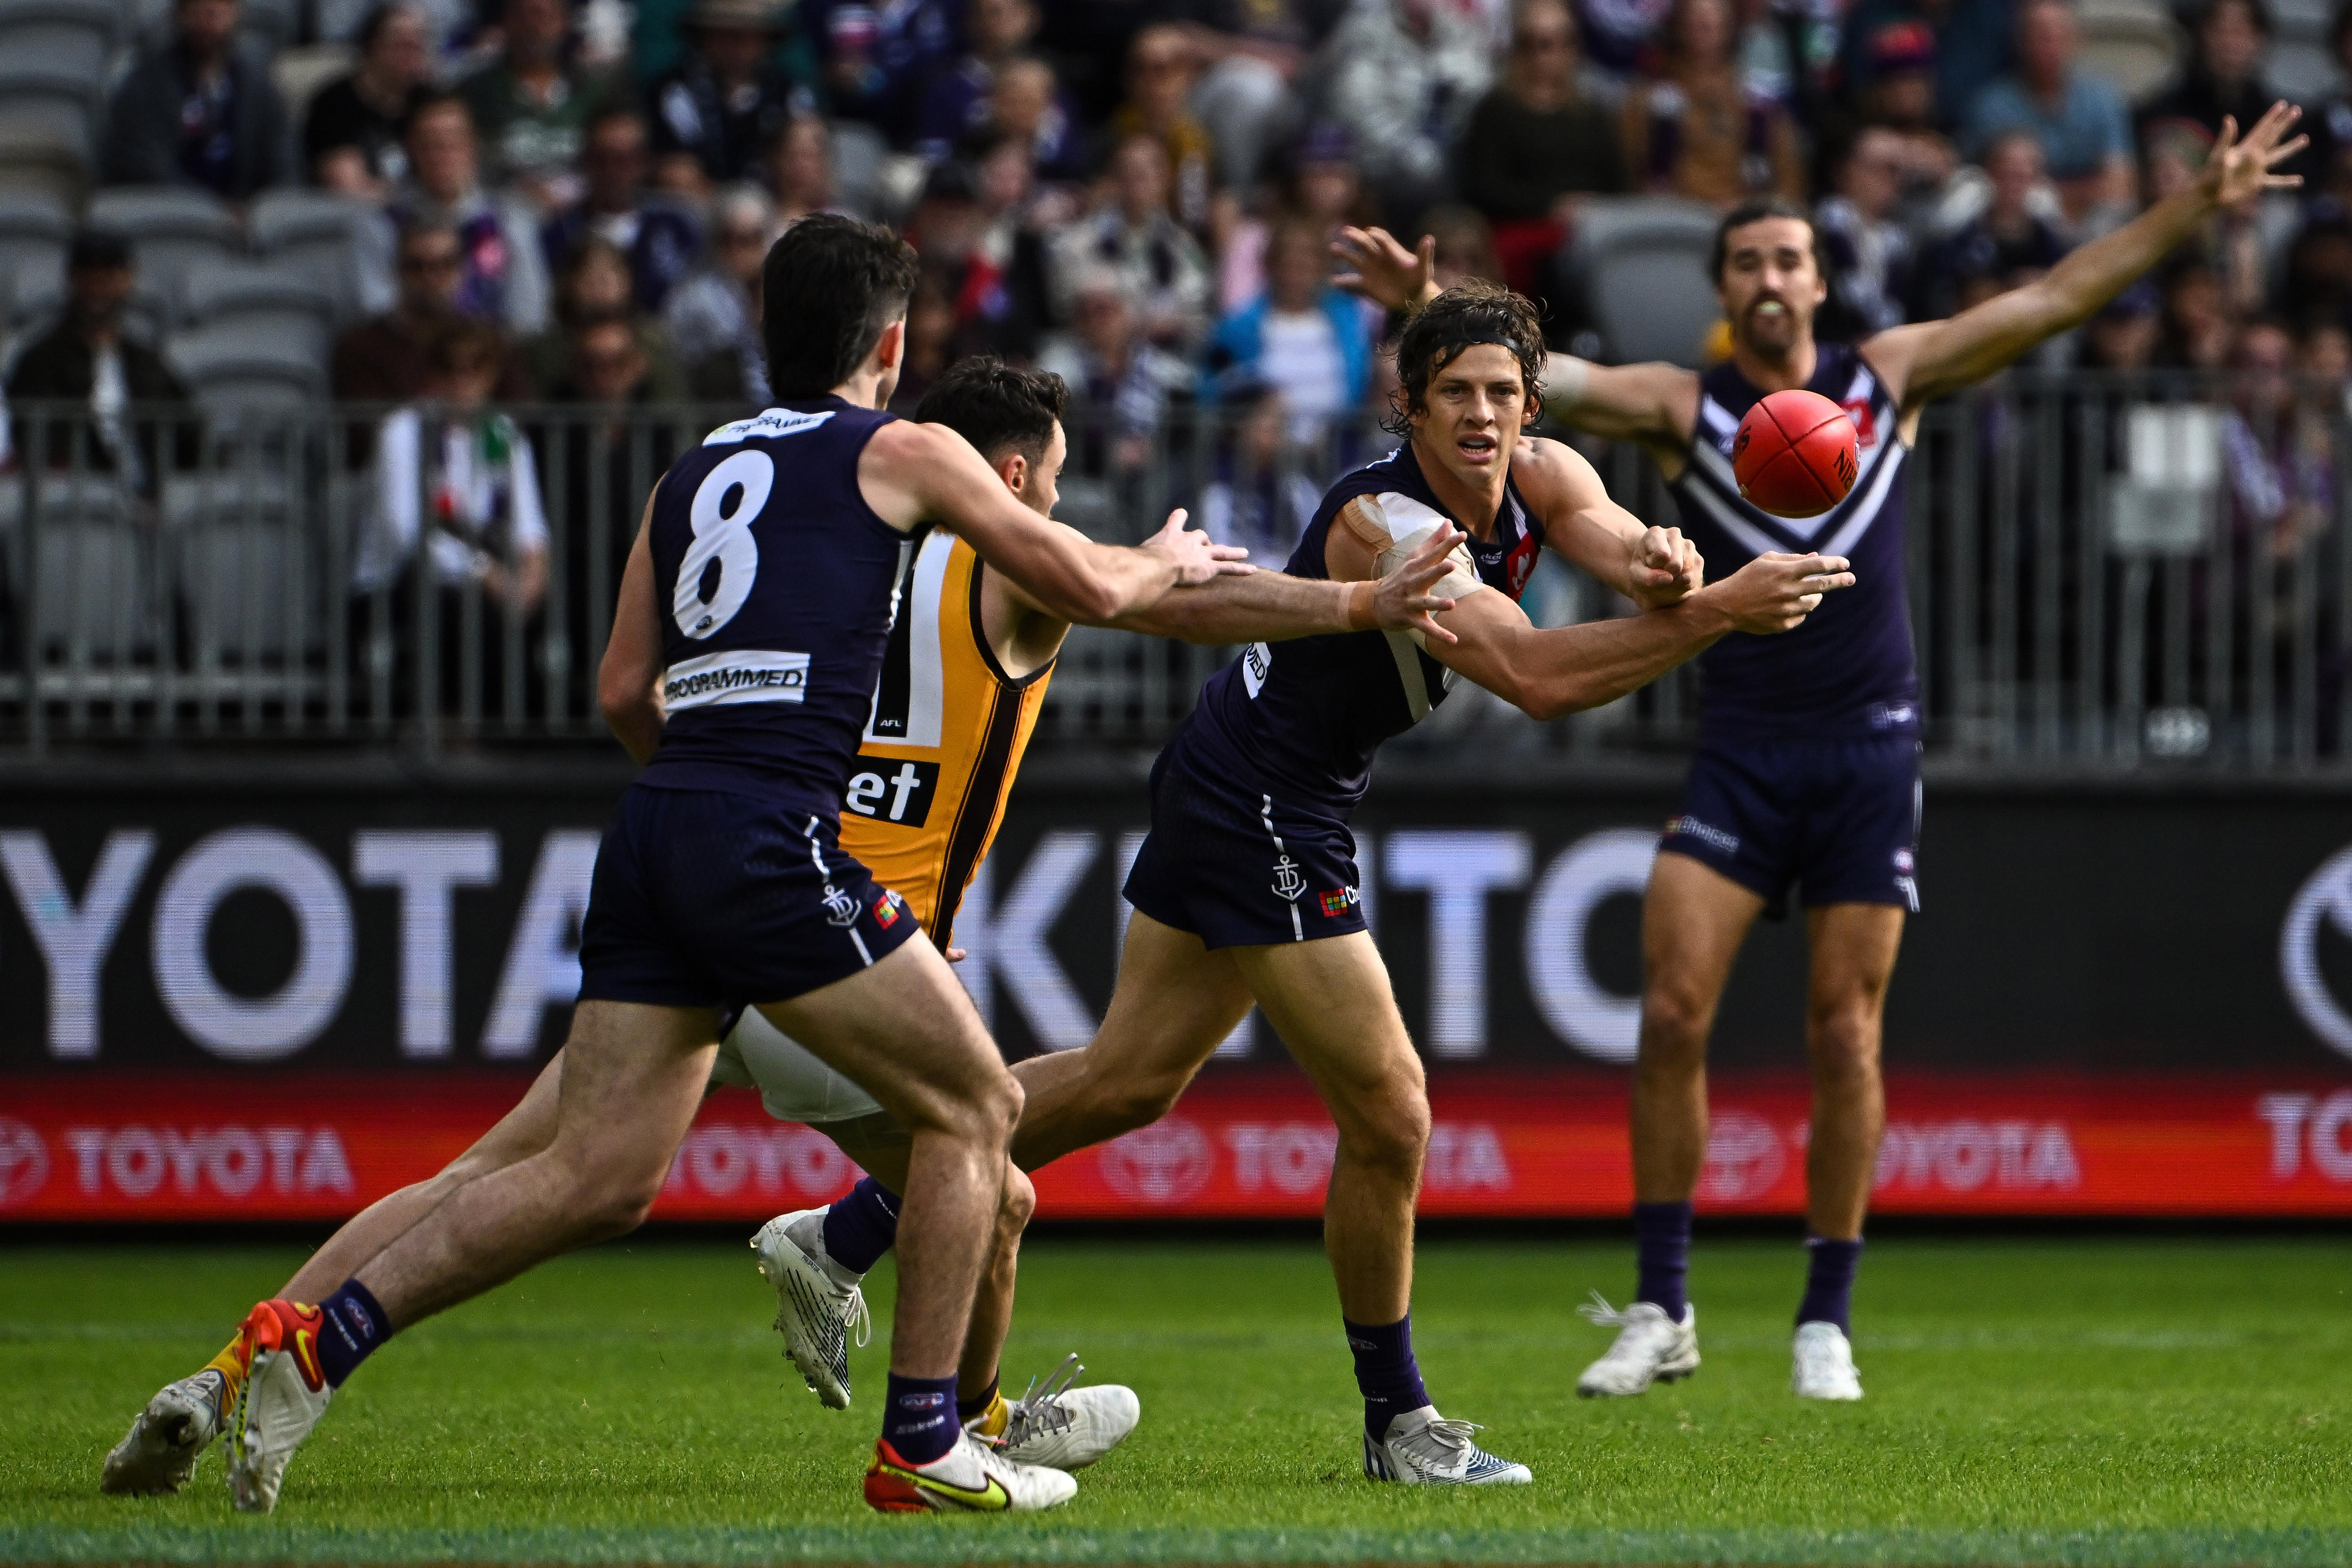 Nat Fyfe looks to give a handball off as teammates and opponents surround him